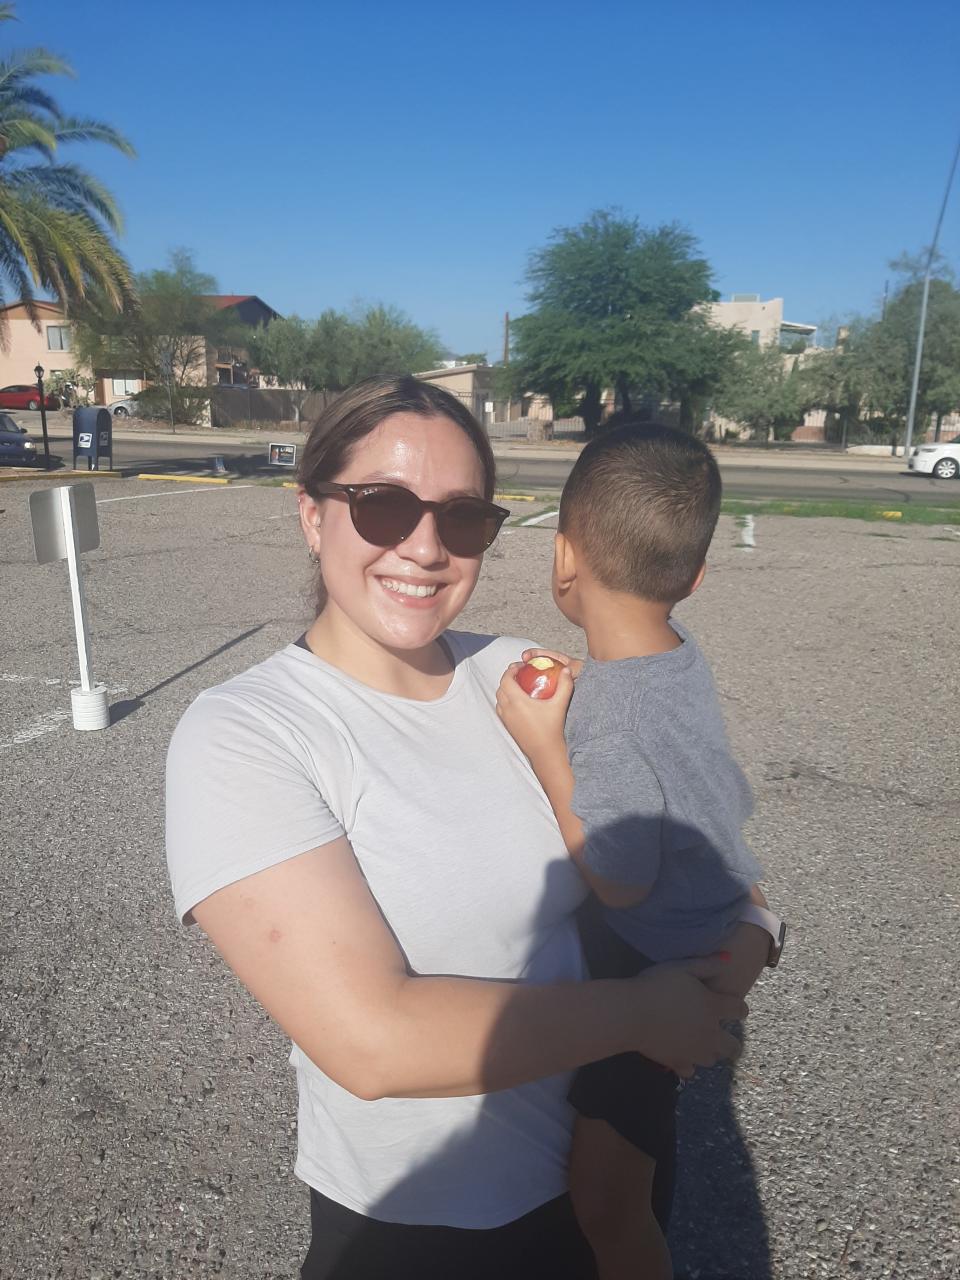 Annalisa Cordova, a self-employed medical contractor, was there with her young son, Sam. The most important issue to her this election is "women's rights, of course."